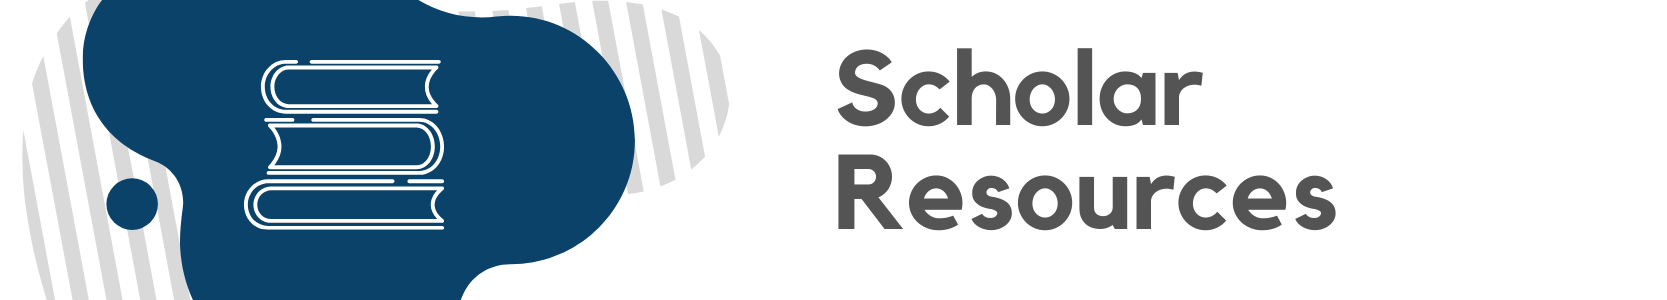 Scholar Resources with a stack of books icon on a striped background layered on a blue blob